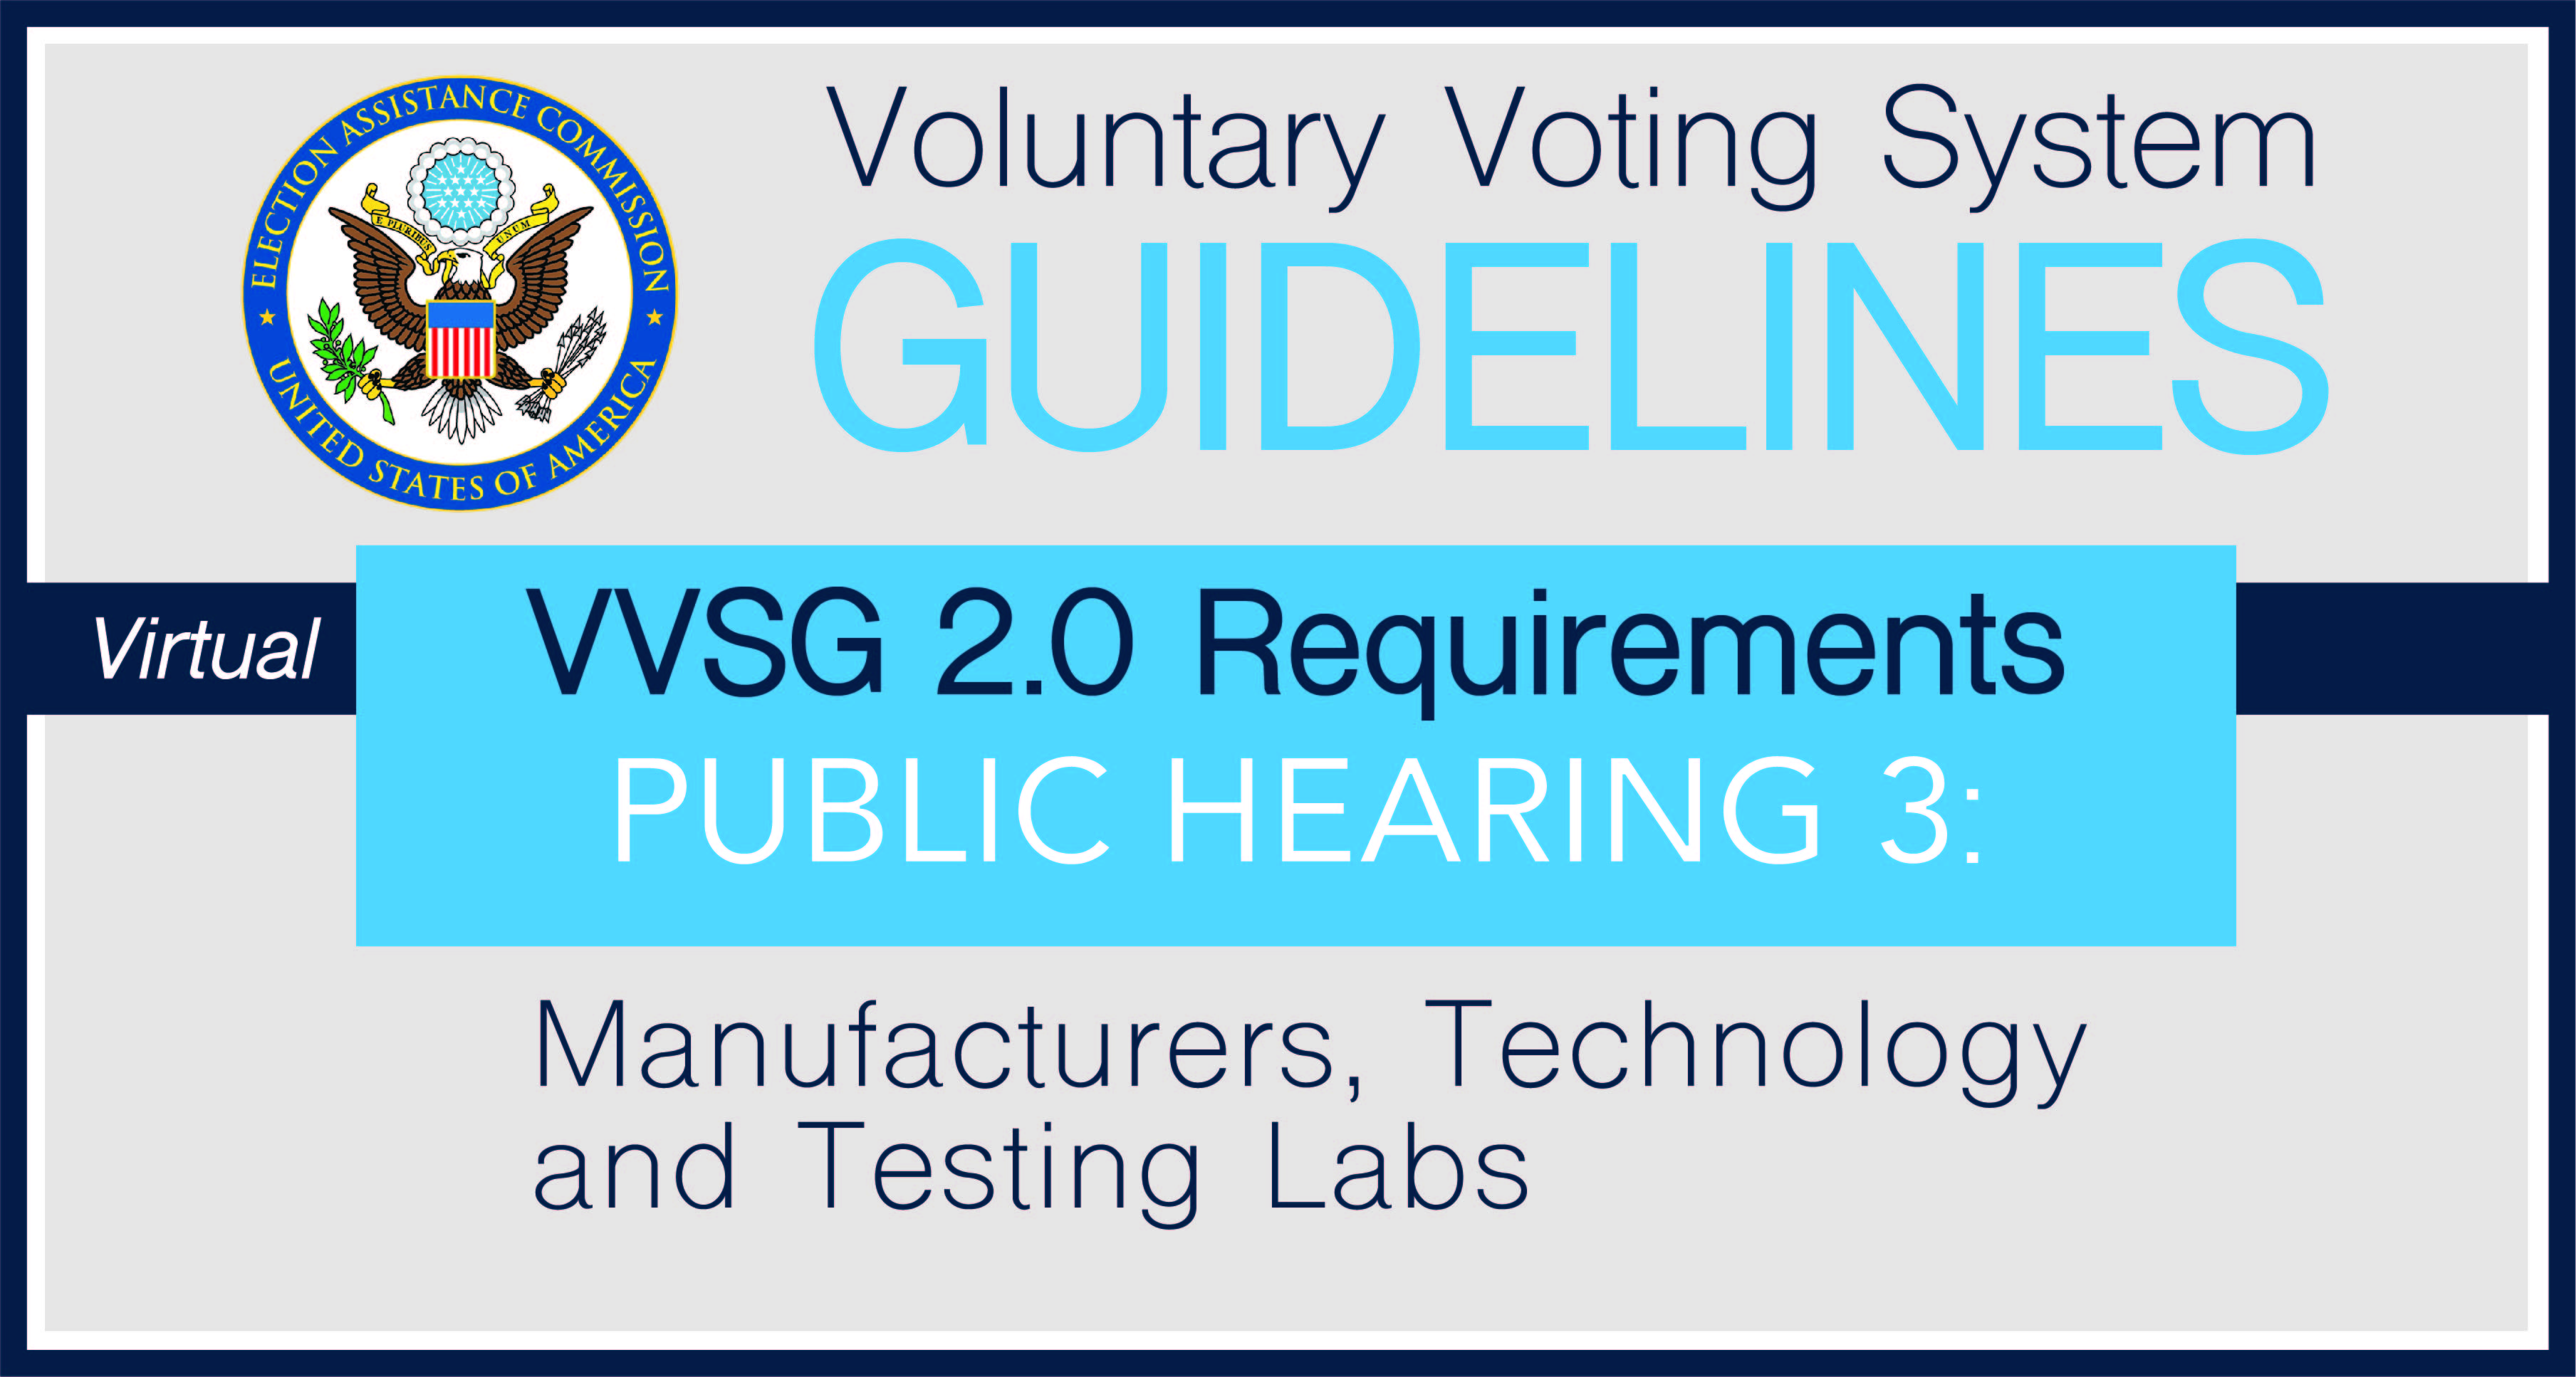 Virtual EAC VVSG Guidelines VVSG 2.0 Public Hearing 3 Manufacturers, Technology and Testing Labs